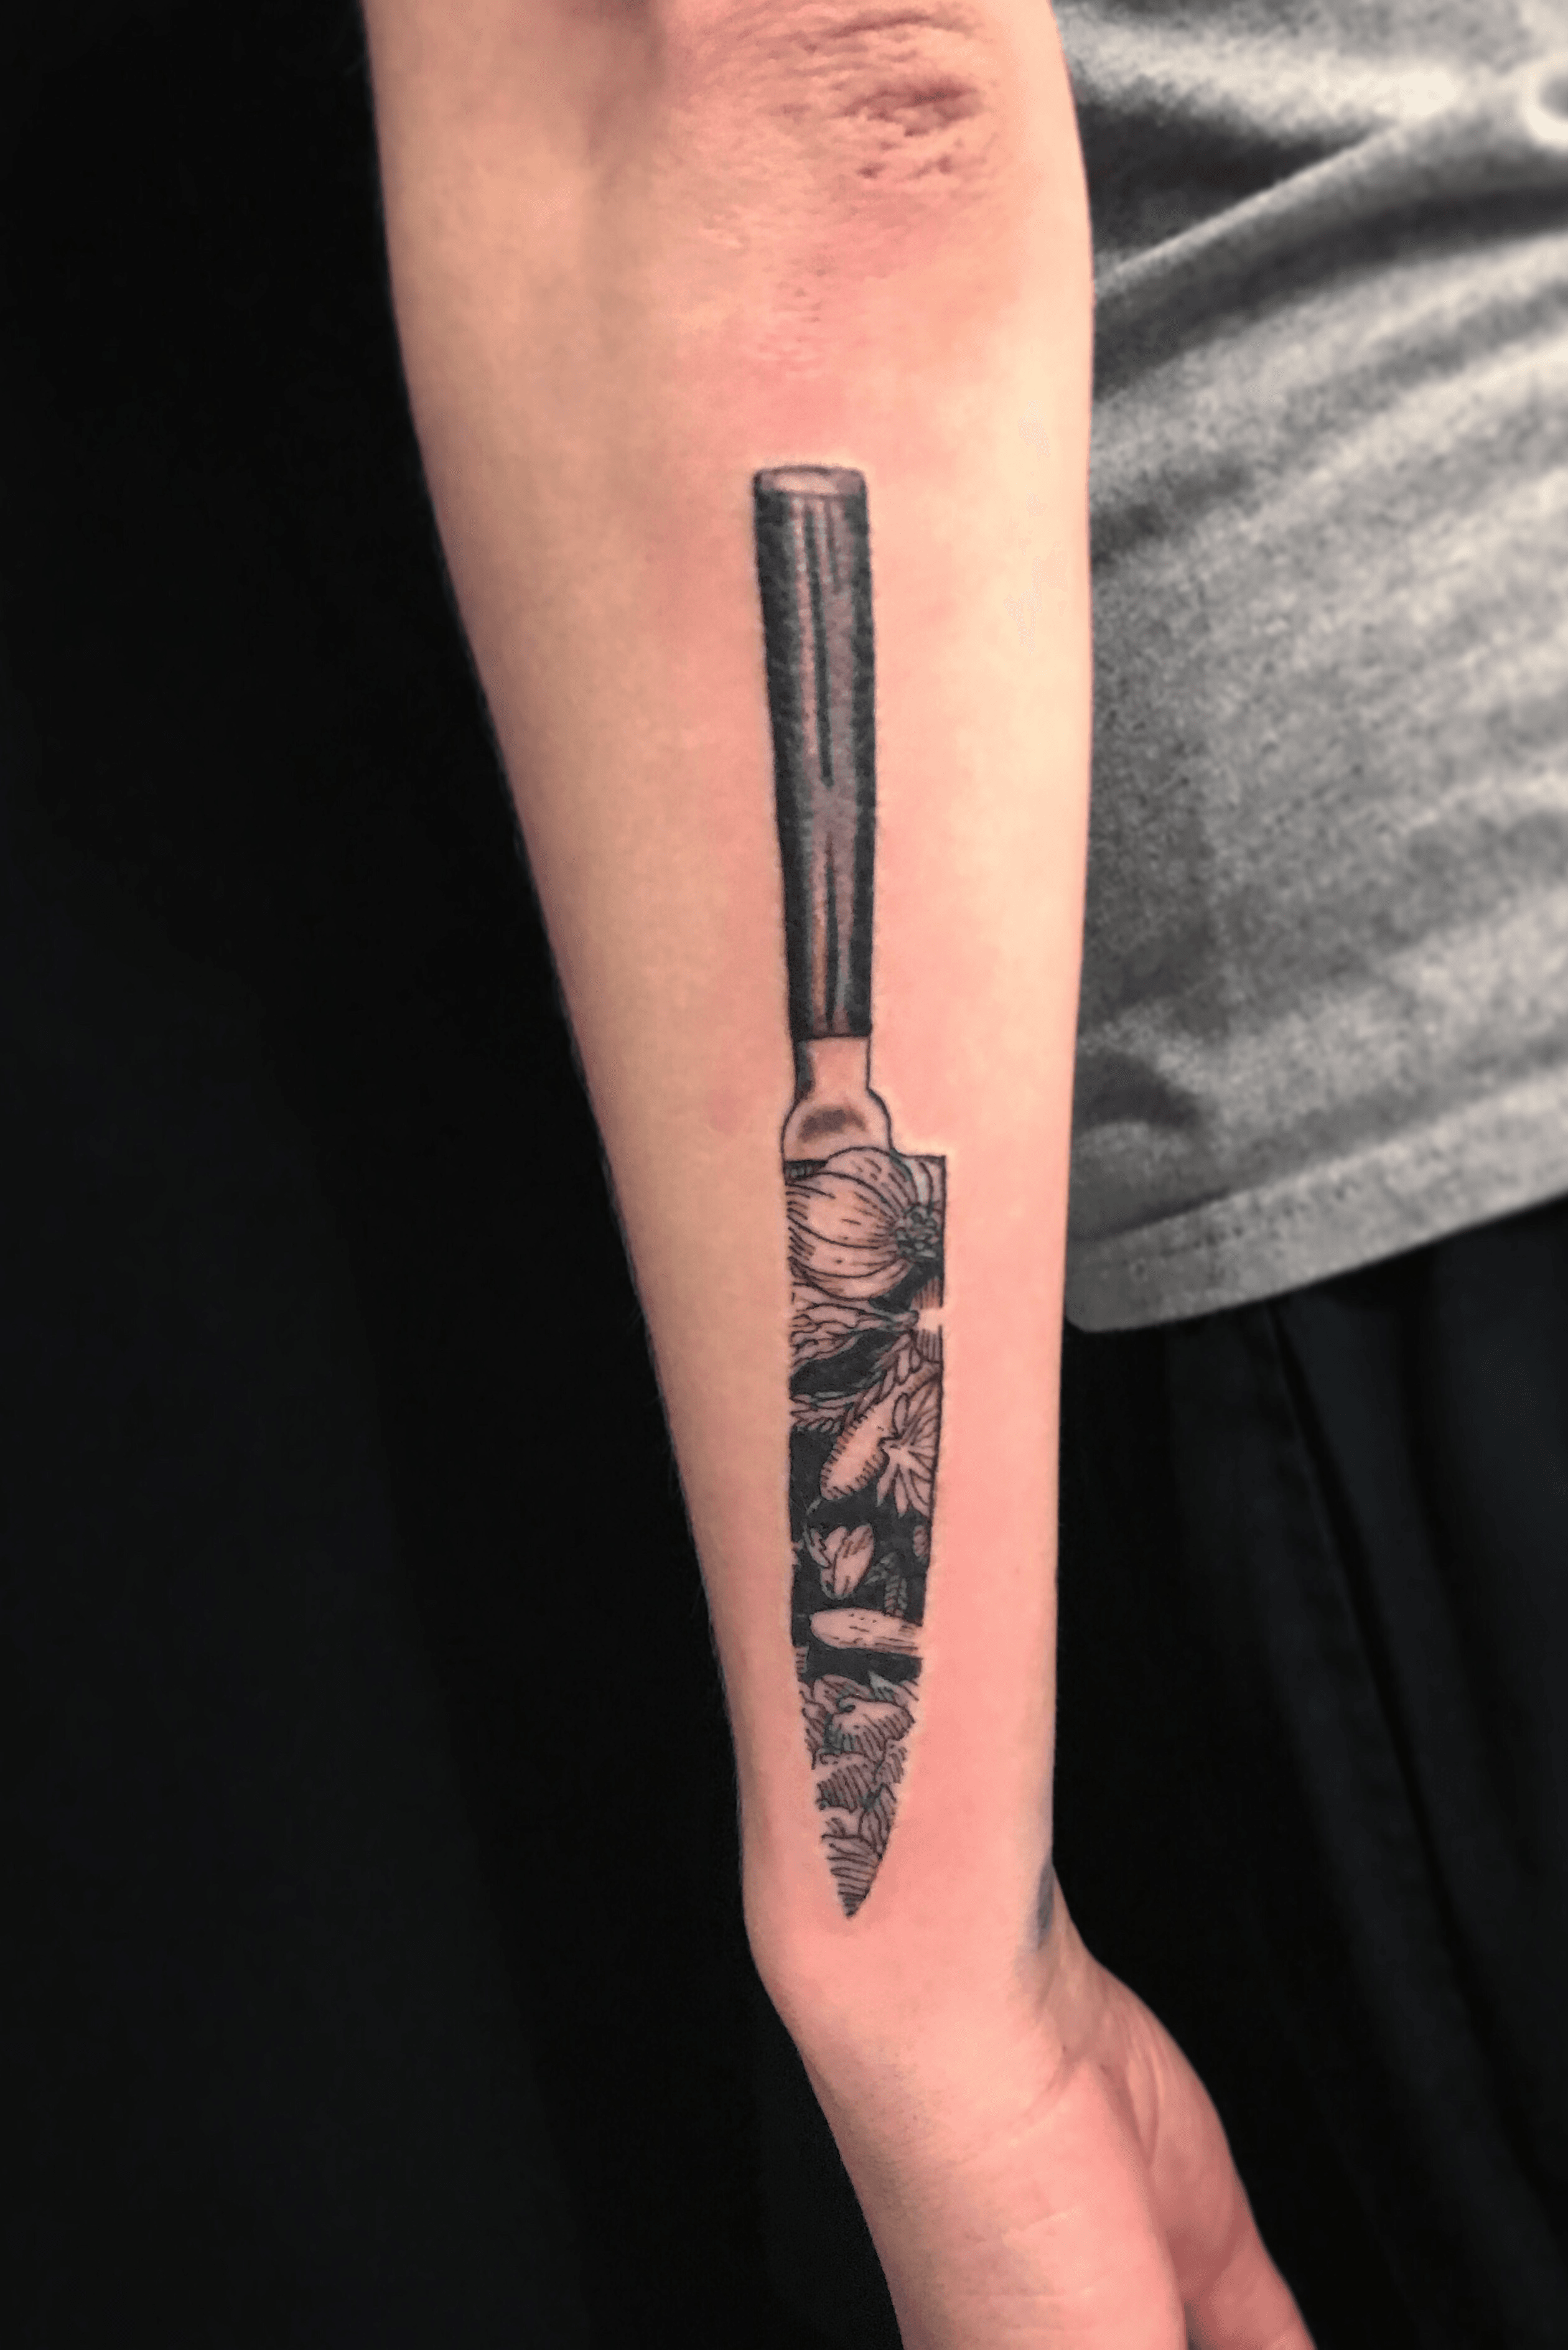 60 Chef Knife Tattoo Designs For Men  Cook Ink Ideas  Knife tattoo  Tattoos Tattoo designs men